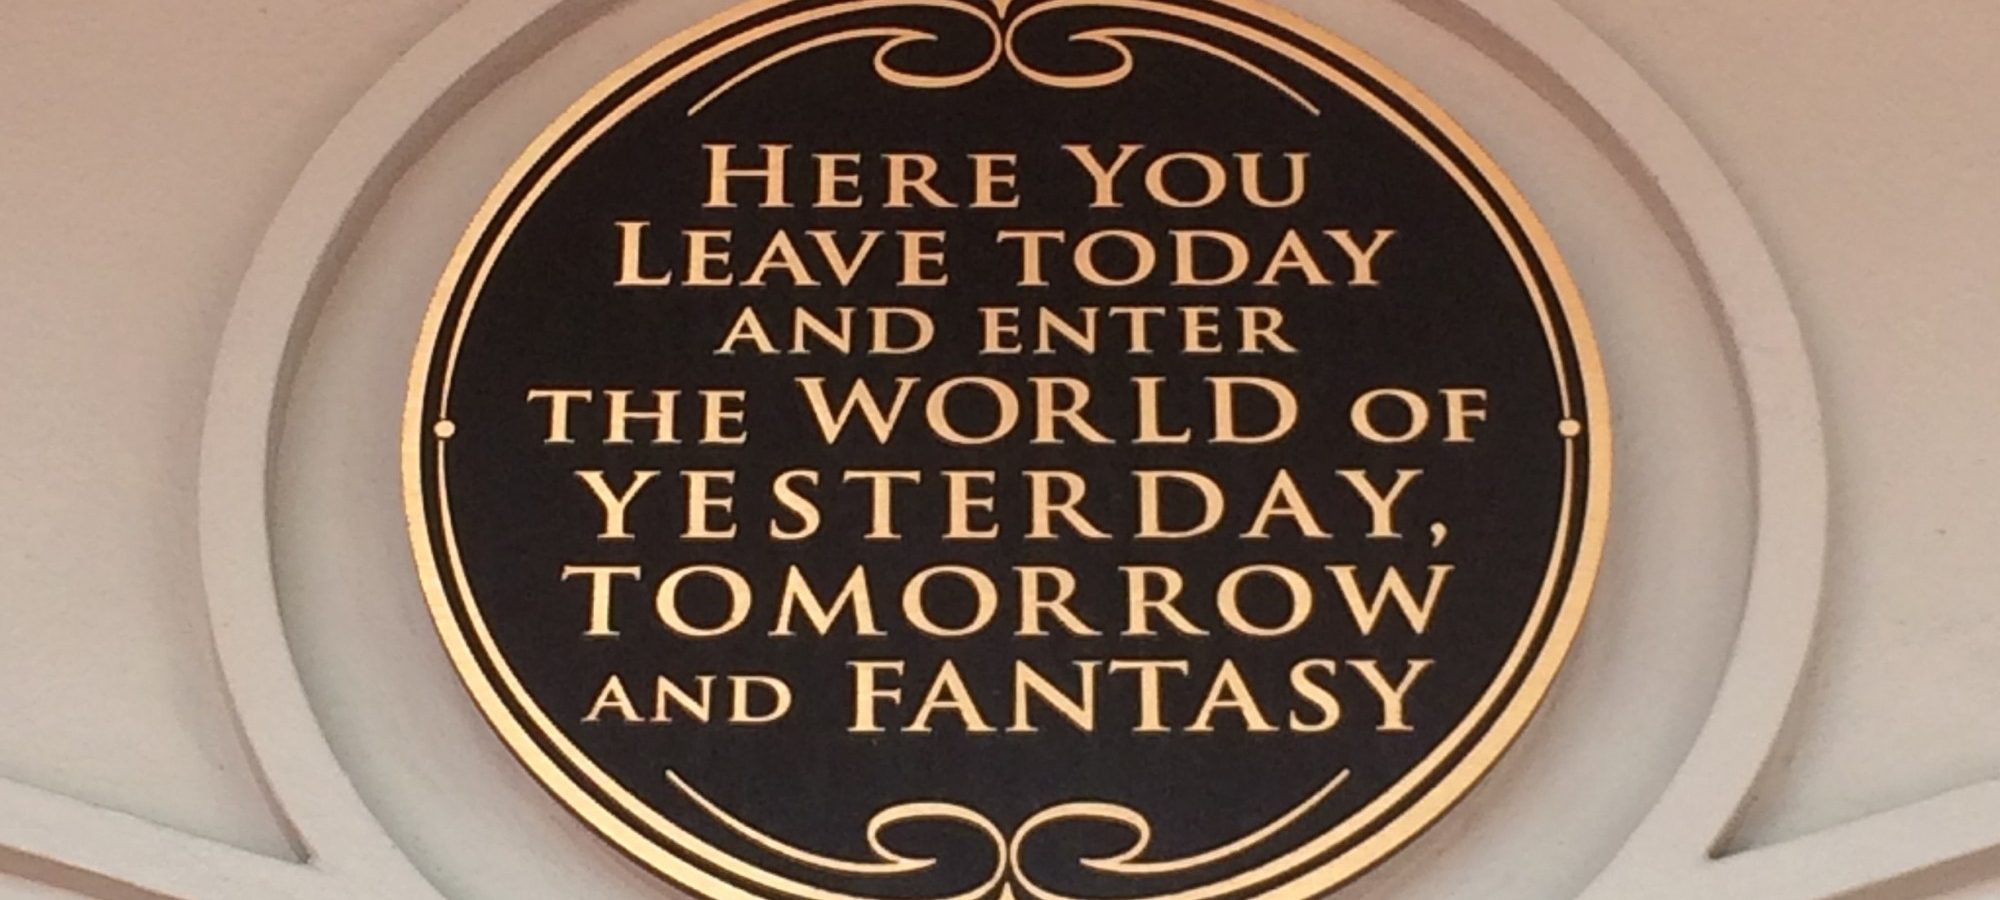 here you leave today fantasy disneyland plaque